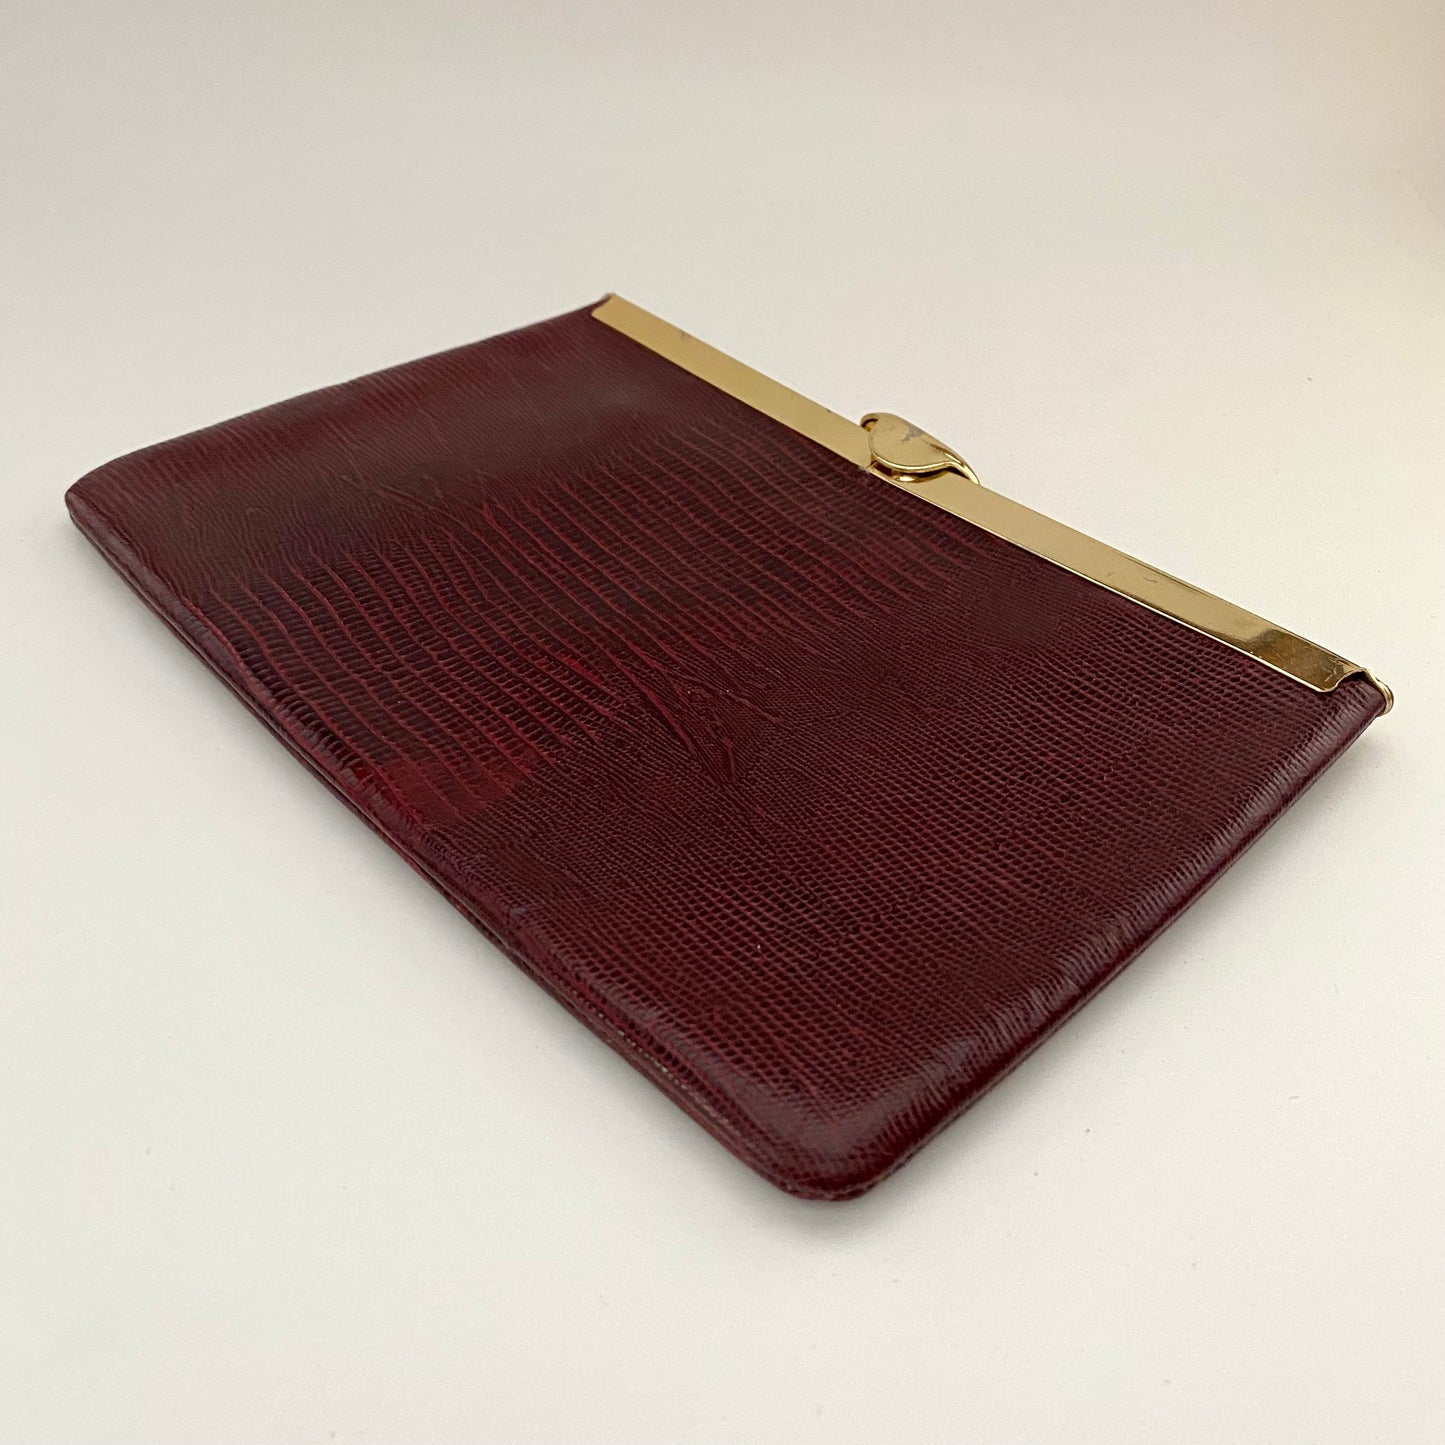 Late 60s/ Early 70s Etra, Genuine Leather Clutch